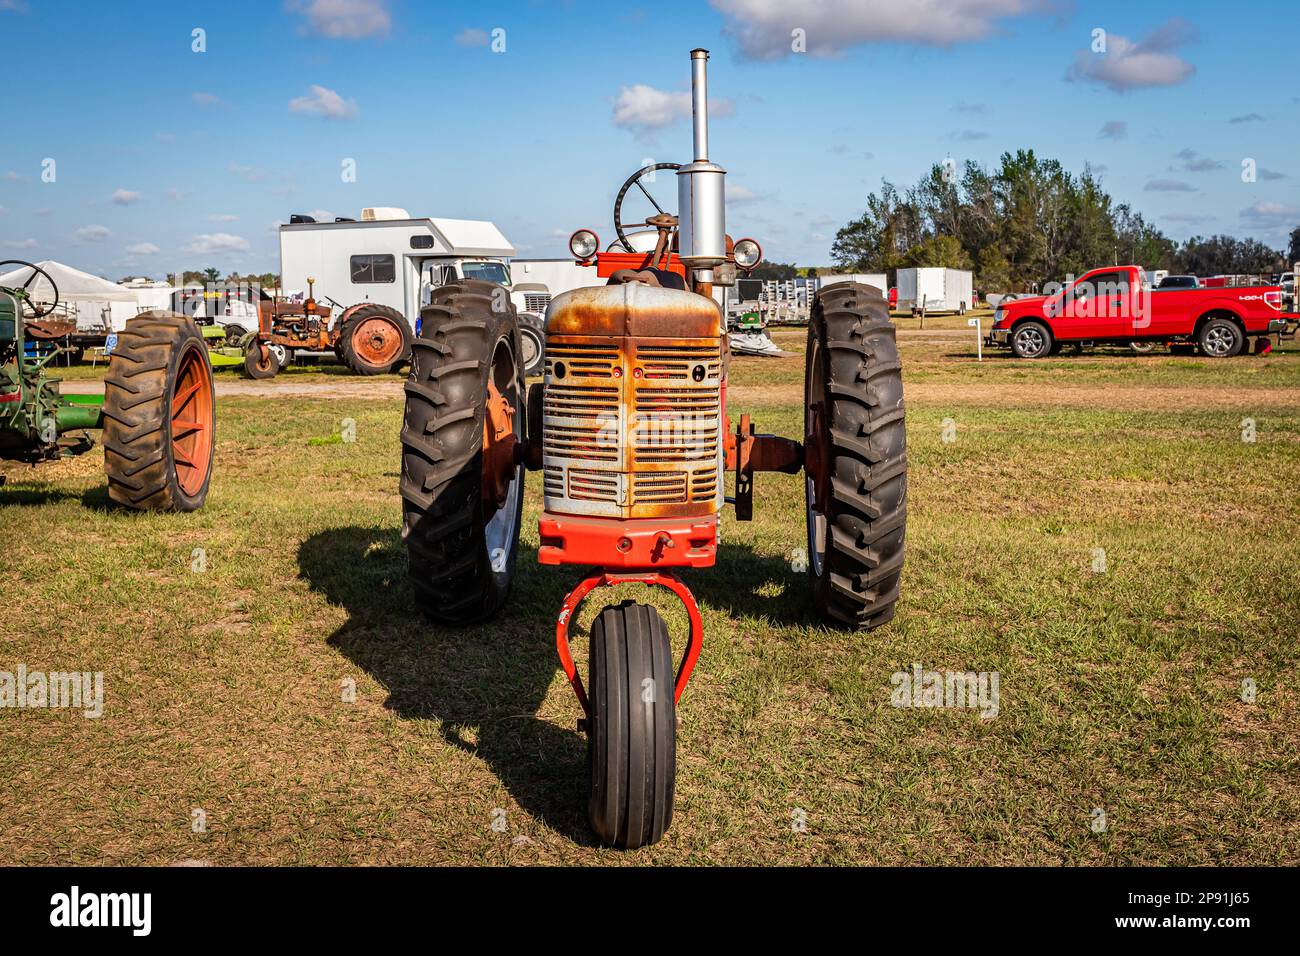 Fort Meade, FL - February 26, 2022: High perspective front view of a 1954 International Harvester McCormick Farmall Super H Tractor at a local tractor Stock Photo